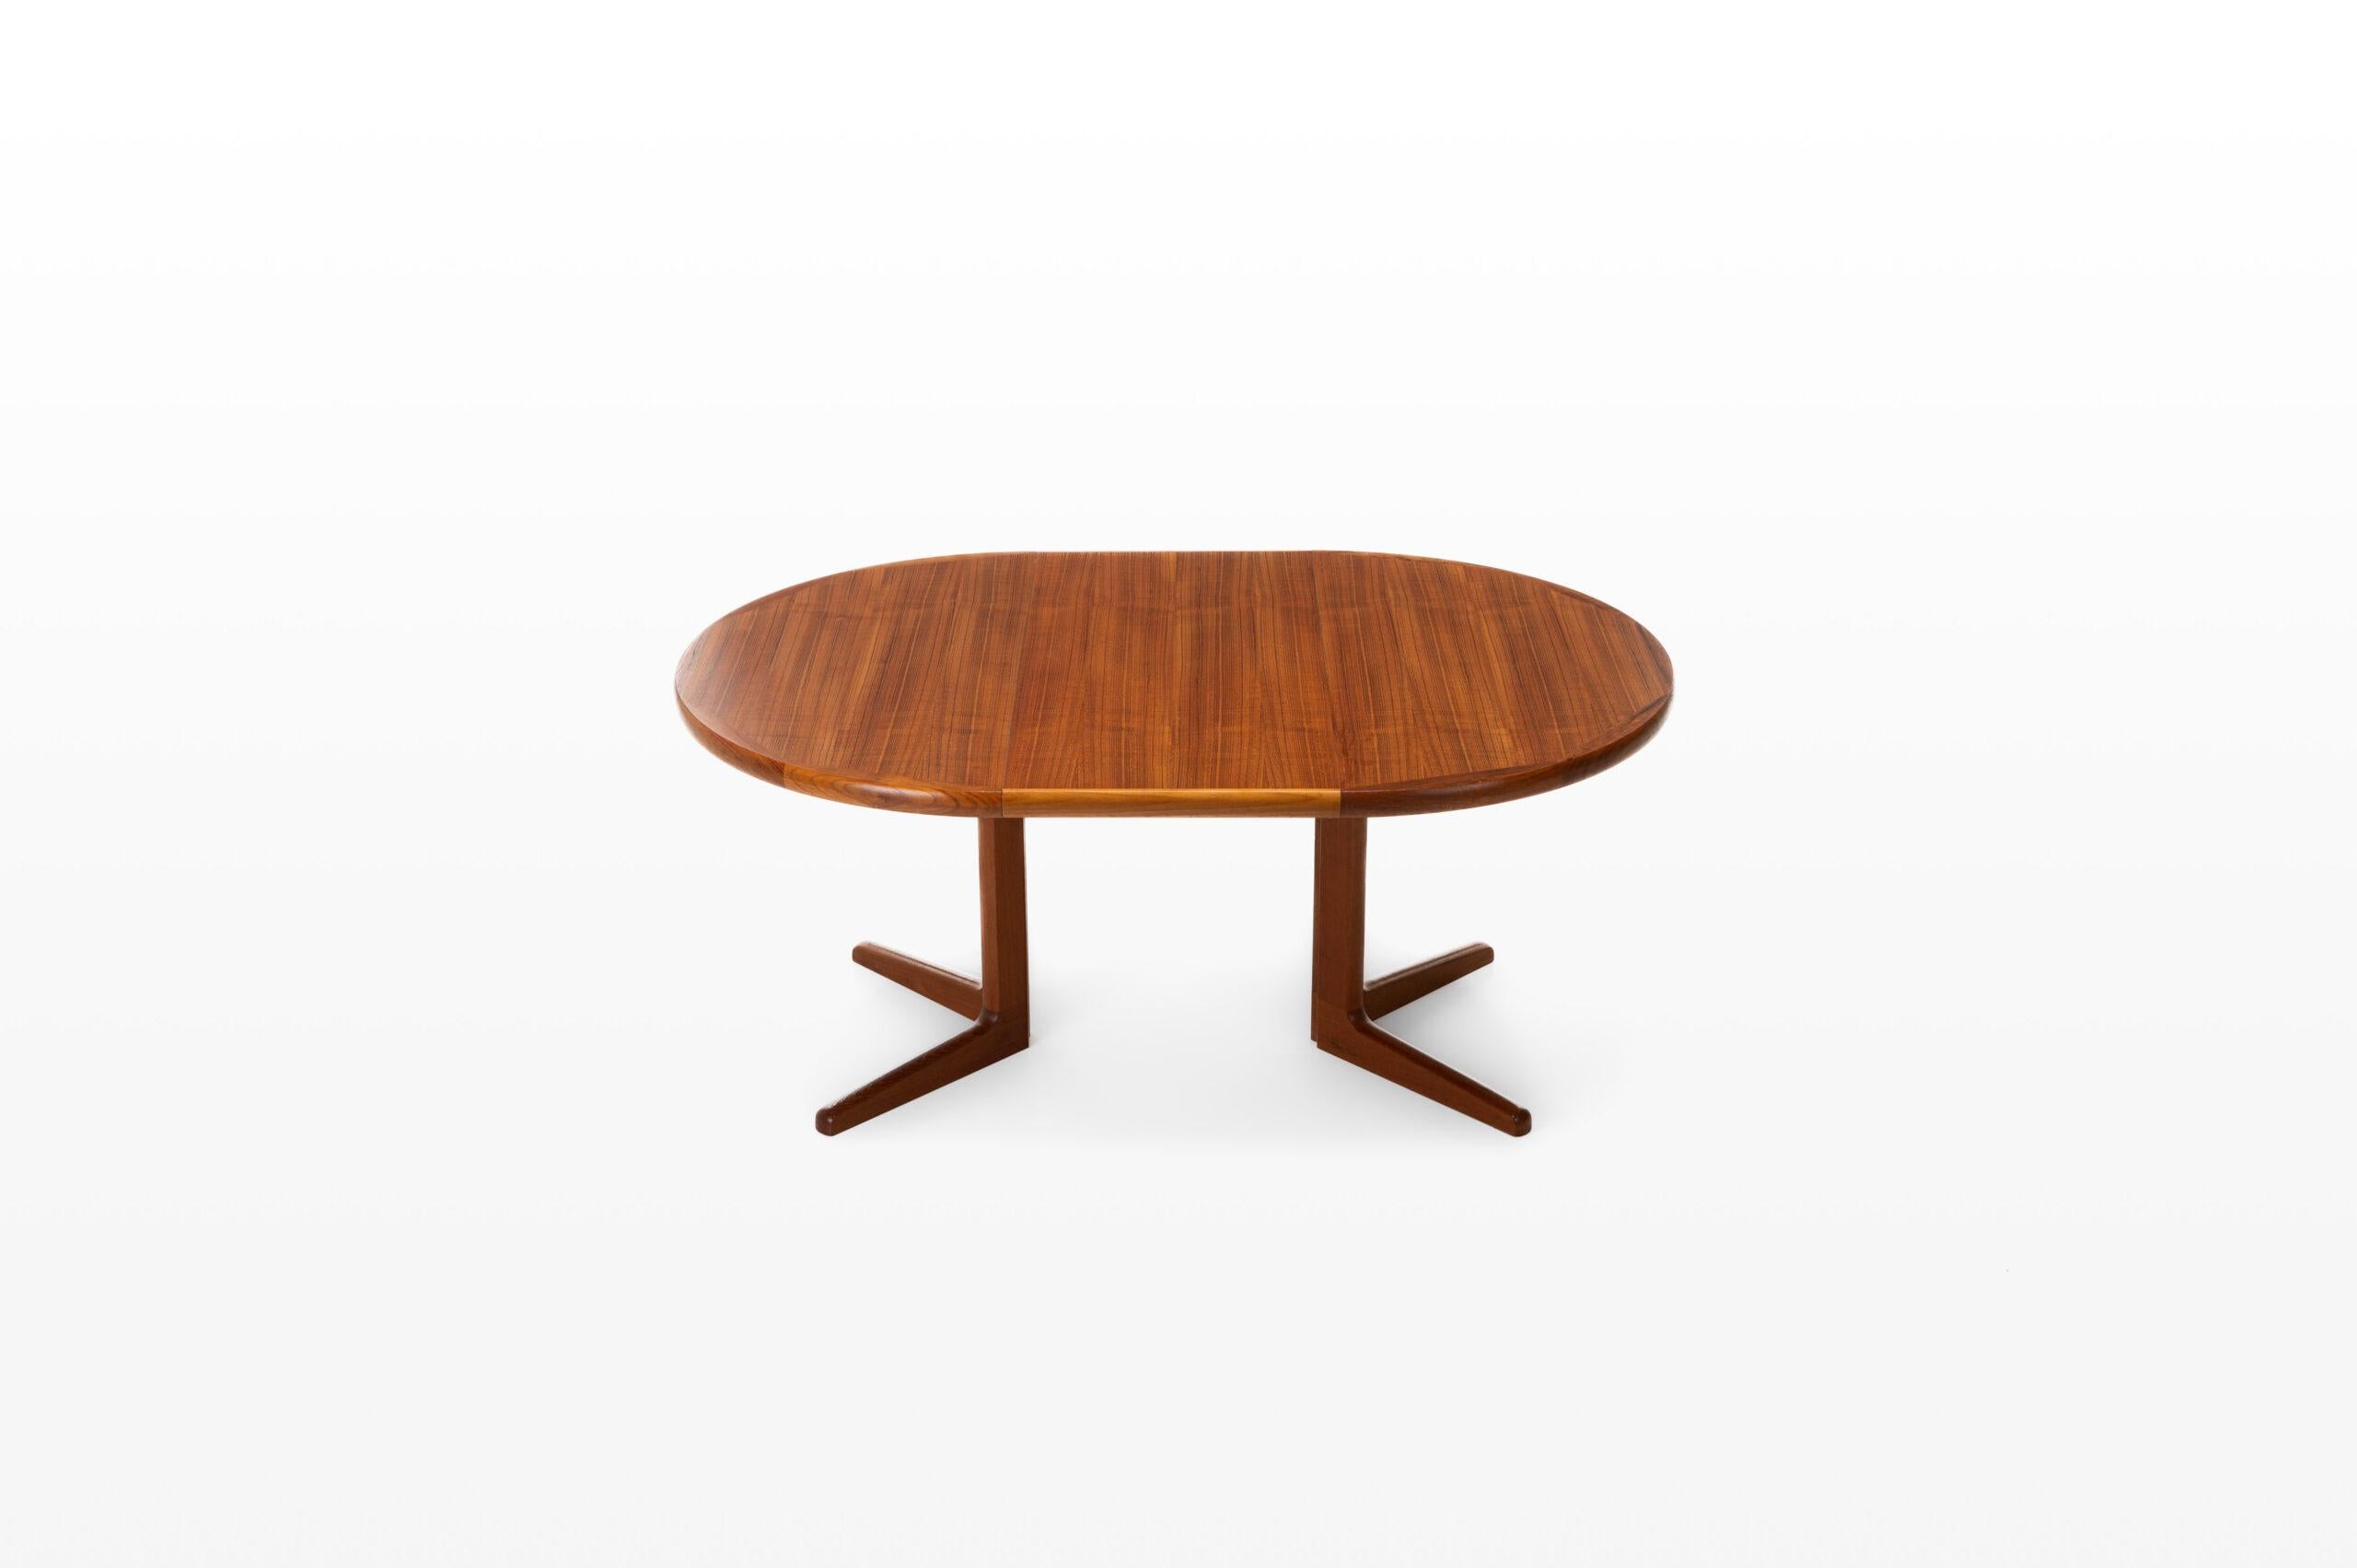 Extendable dining table produced by Korup Stolefabrik, Denmark 1960s. The table is made of teak and in very good condition.

Dimensions:
W: 115 – 165 – 215 cm
D: 115 cm
H: 72 cm.